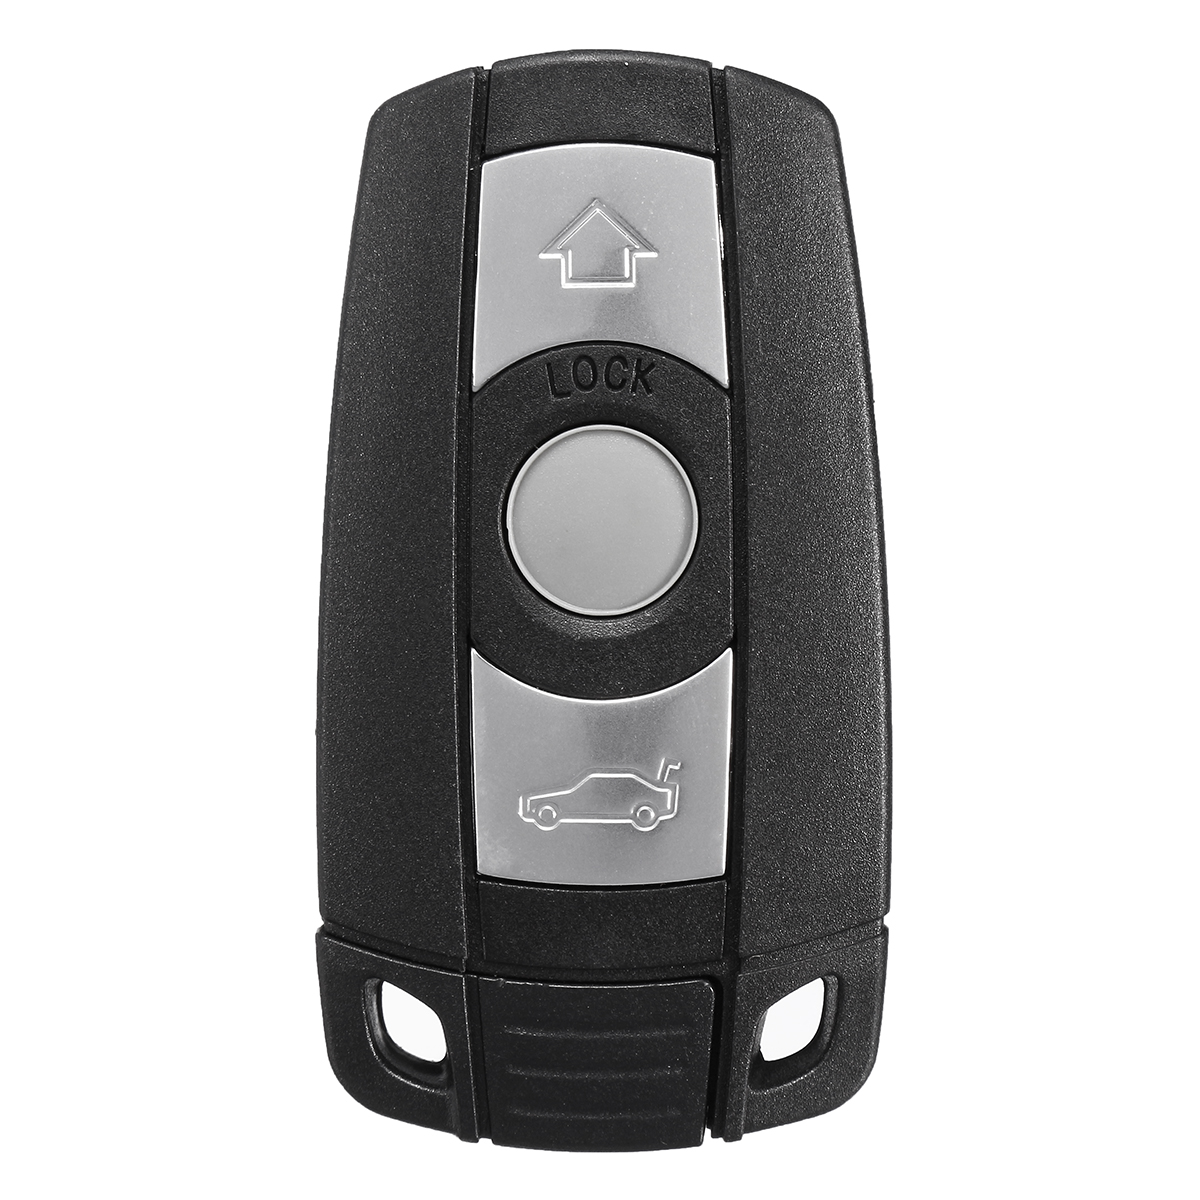 

3 Buttons Remote Key Fob With CR2025 Battery For BMW 1 3 5 6 7 Series E90 E92 E93